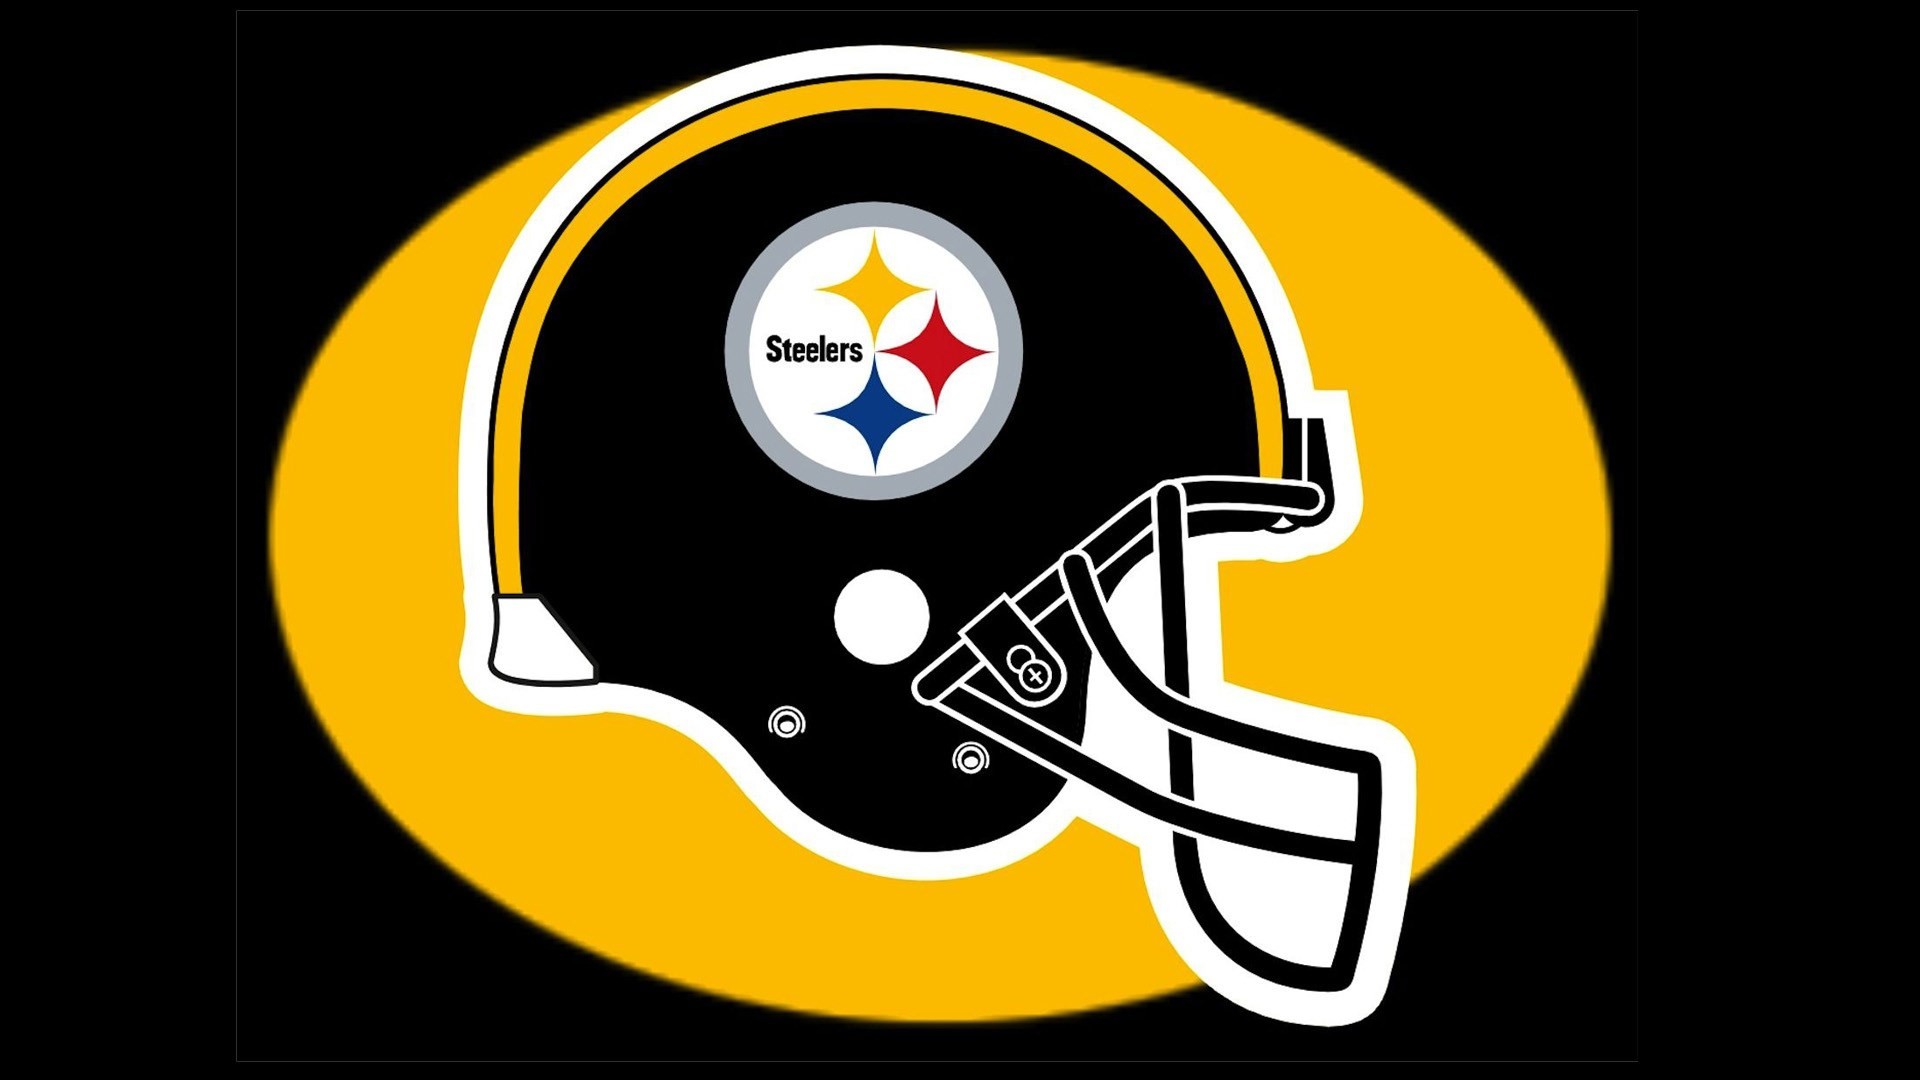 1920x1080 pittsburgh steelers wallpapers 1080p high quality by Hallstein Peacock  (2016-09-13)